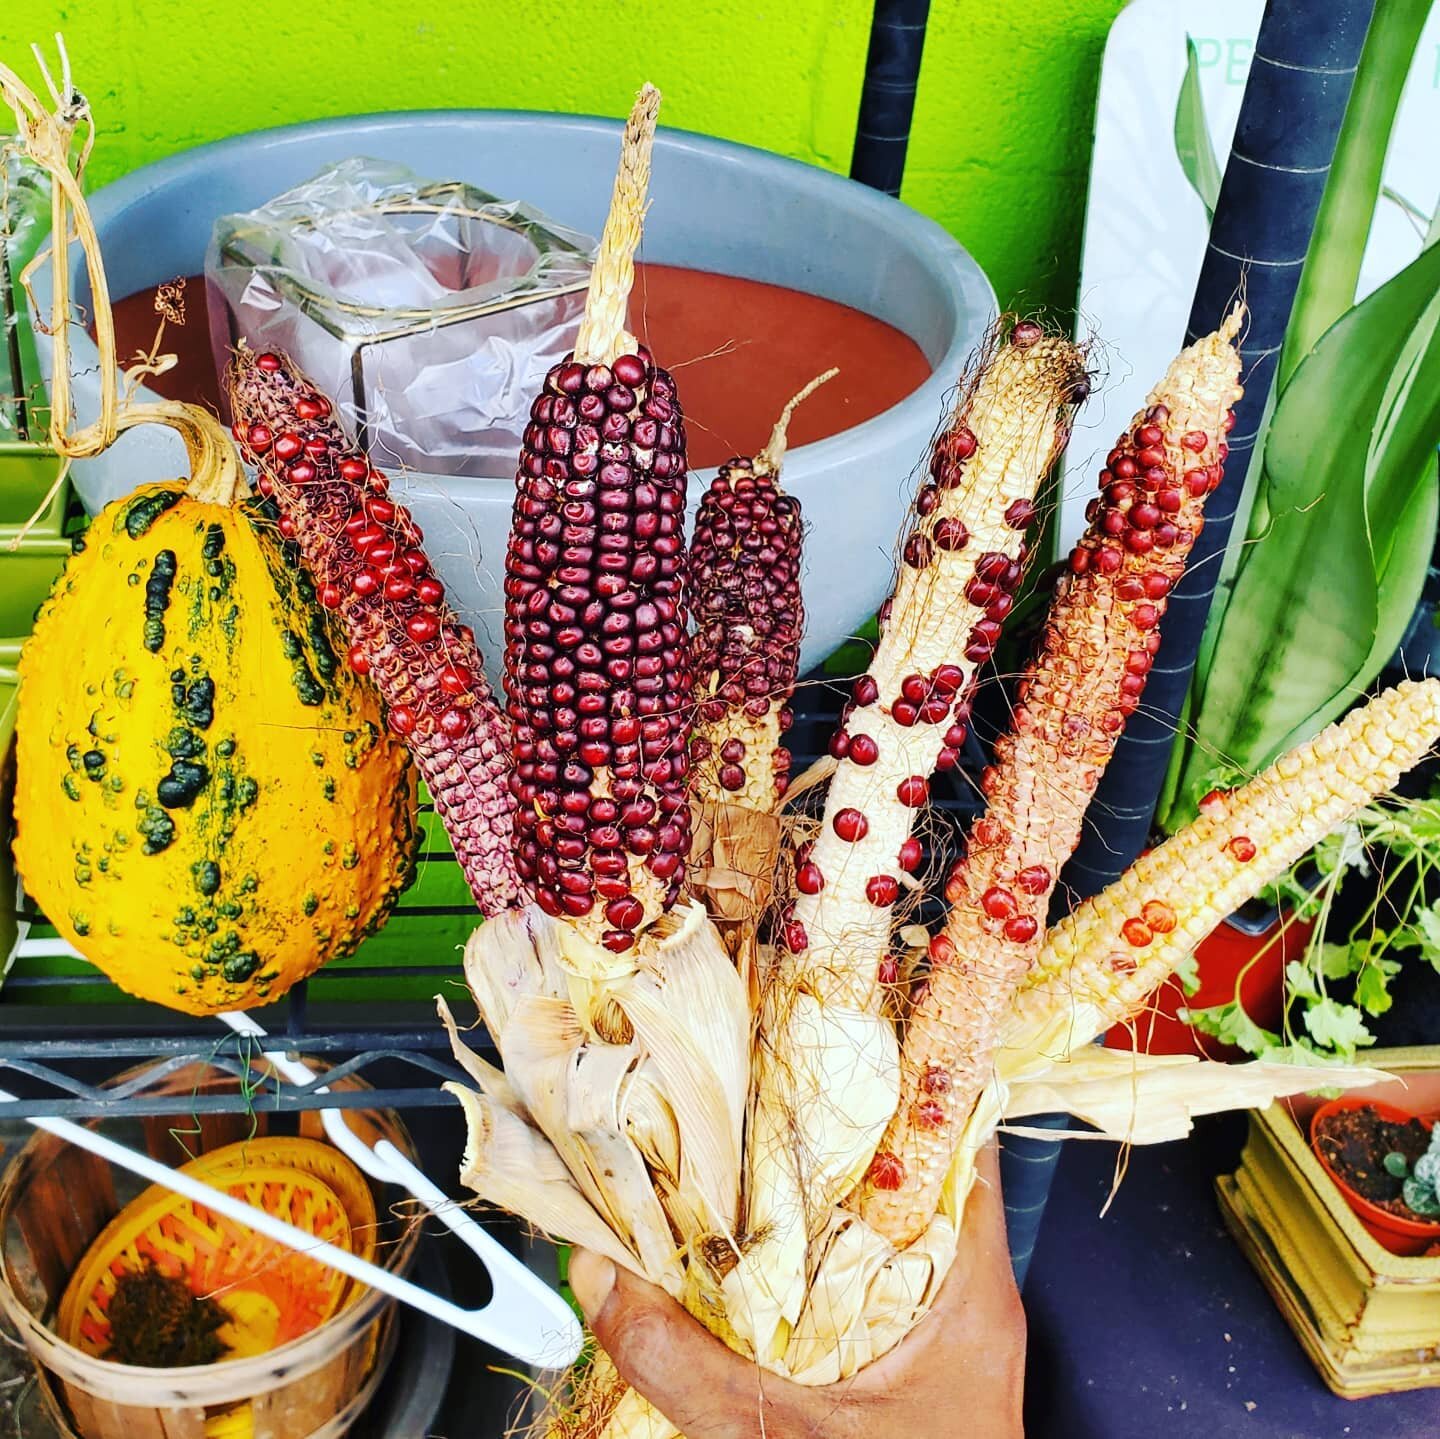 Fall decor #compost finds @idea_pcs 🌽🌽🌽 Last December we added our leftover pumpkins, gourds and corn to the #compostpile- a few of the seeds started germinating and growing in late spring and we just didn't have the heart to pull them out. The st